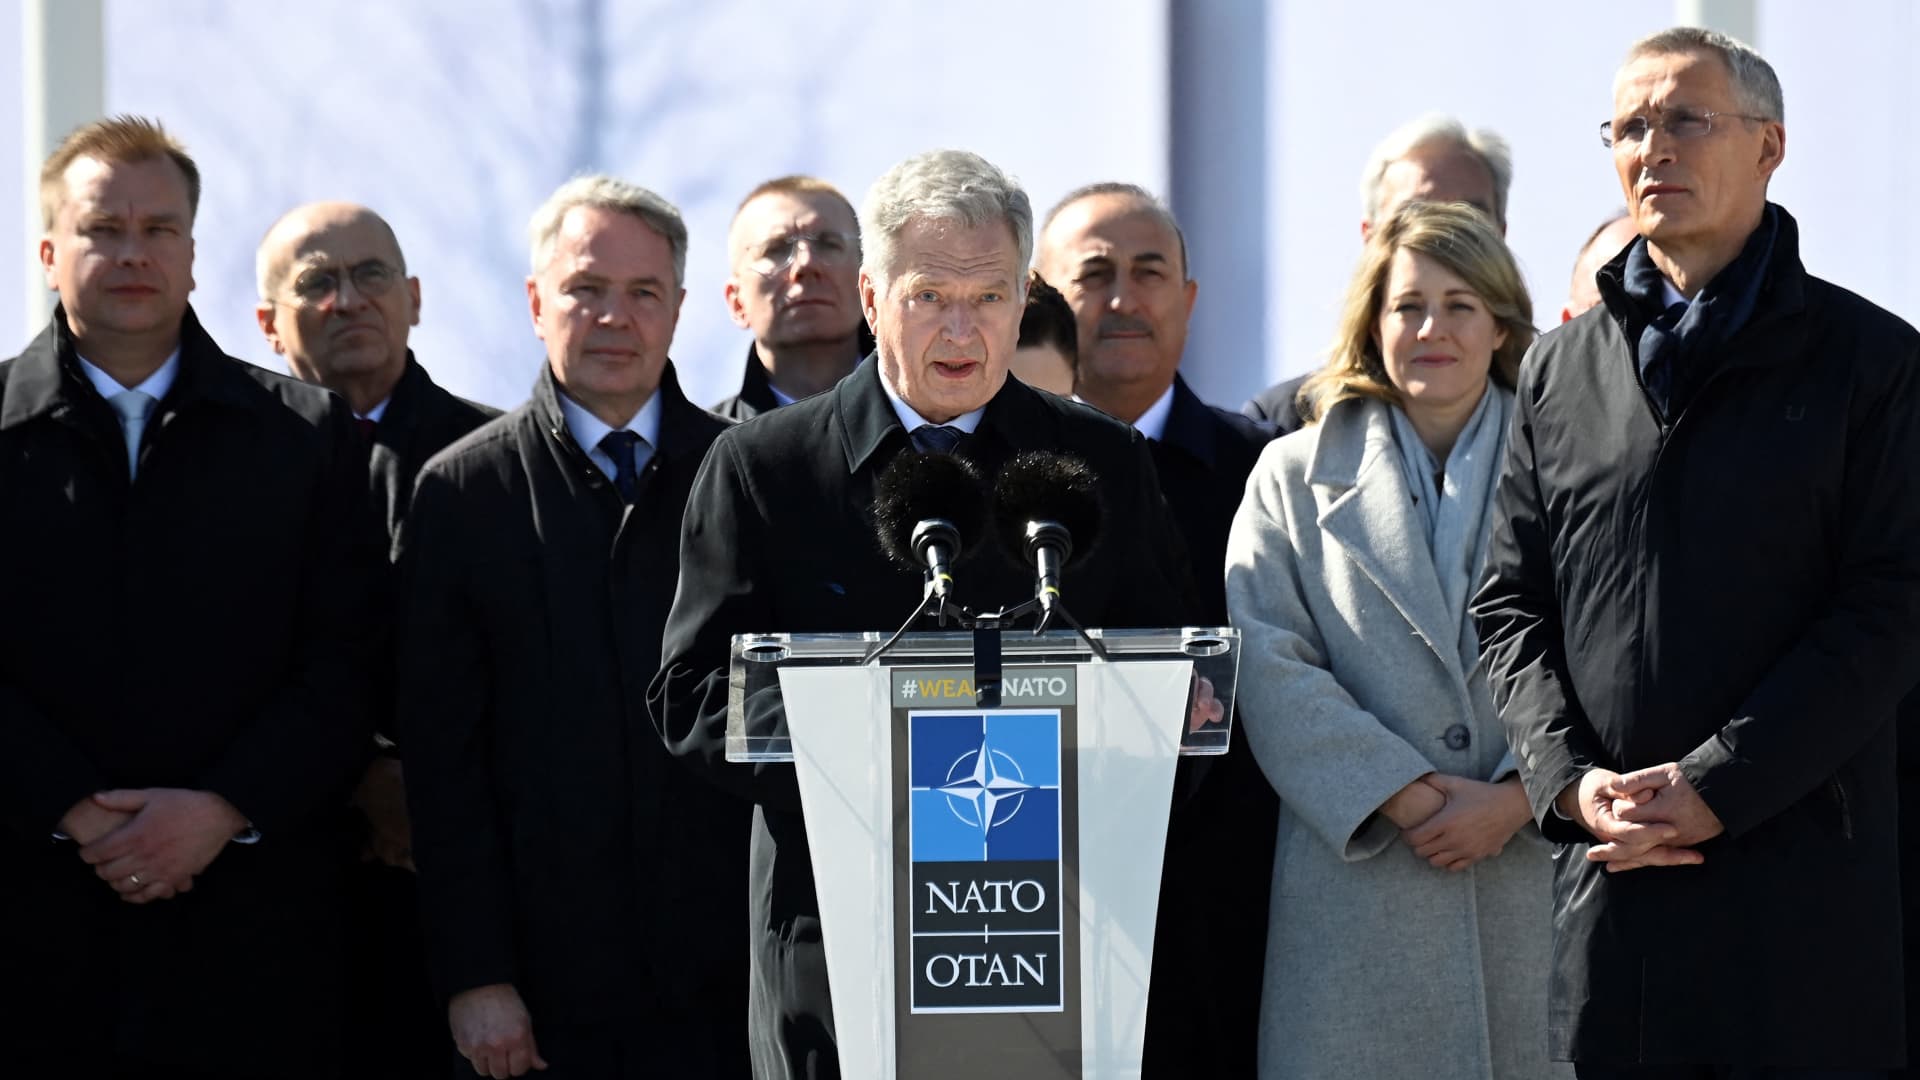 Finland's President Sauli Niinisto (C) delivers a speech at the ceremony to install the Finnish national flag at the NATO headquarters in Brussels, on April 4, 2023. - Finland on April 4, 2023 became the 31st member of NATO, wrapping up its historic strategic shift with the deposit of its accession documents to the alliance. 